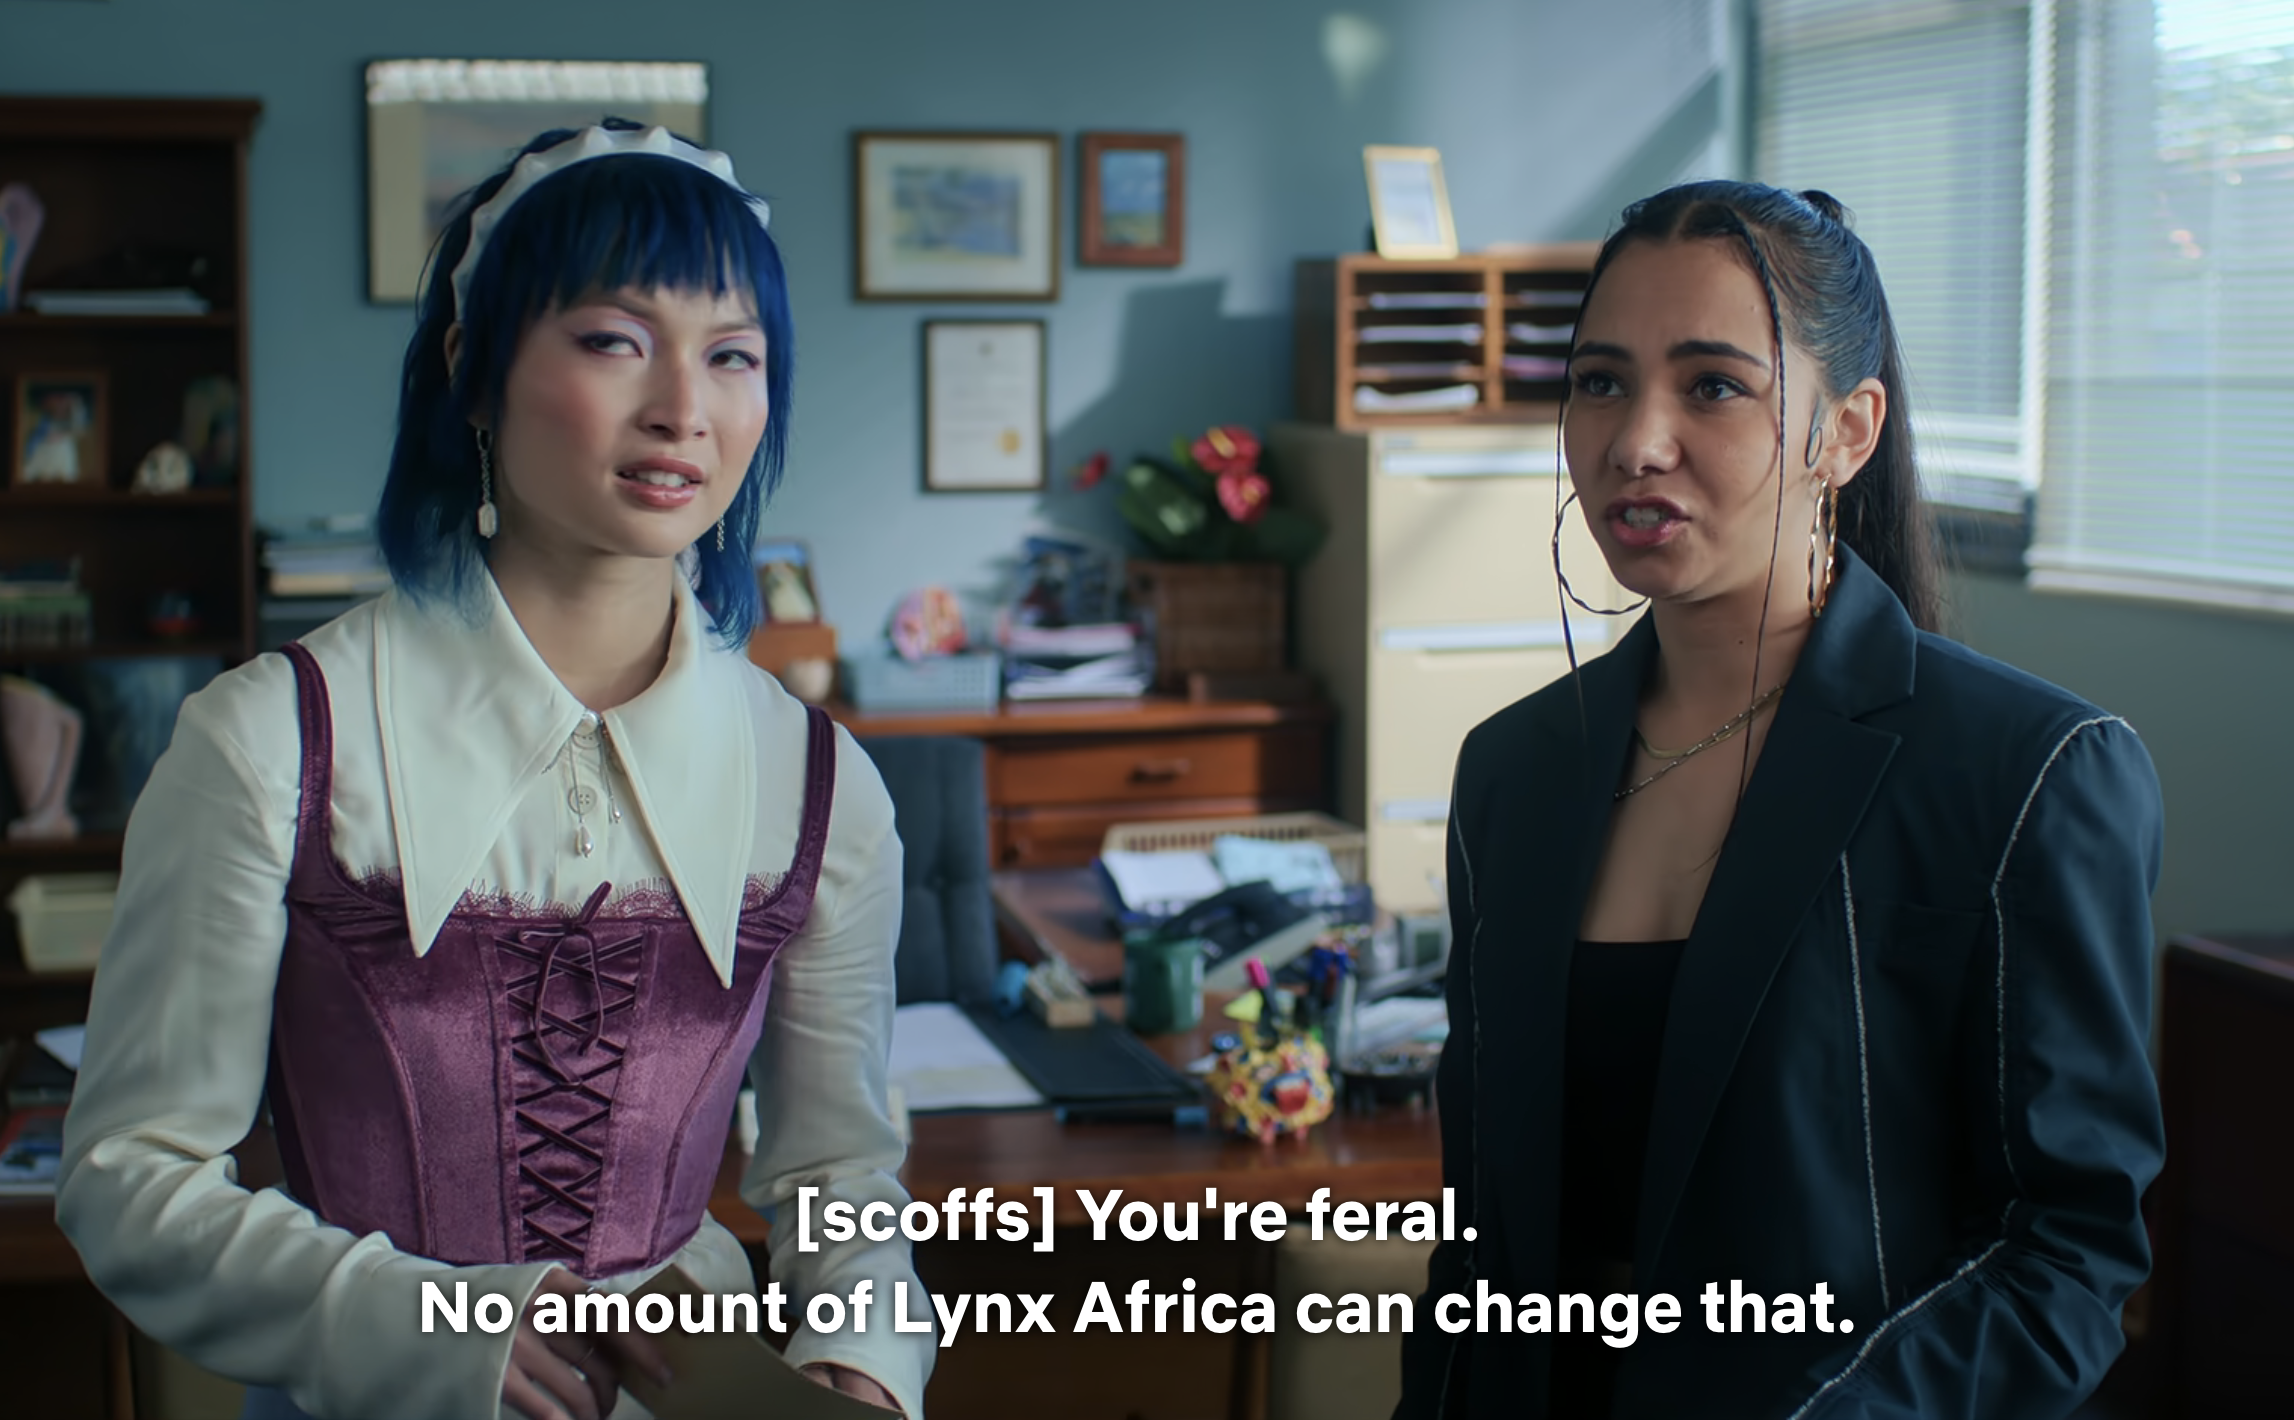 Two characters from a TV show in a scene, one in a vest and blouse, the other in a blazer, with dialogue subtitles